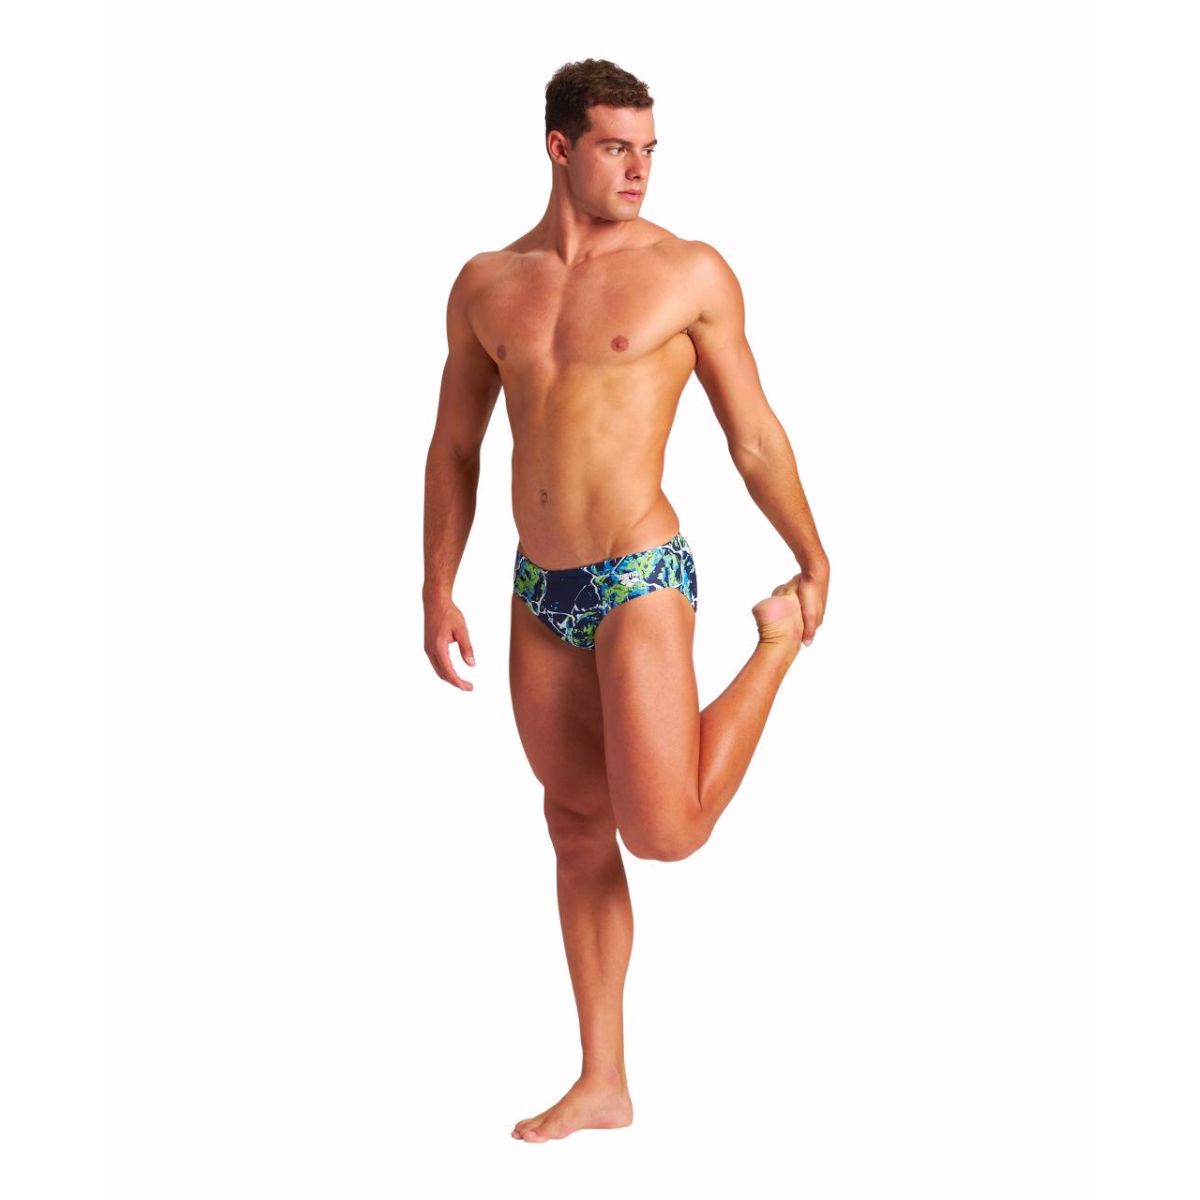 ARENA MEN'S EARTH TEXTURE BRIEF - NAVY/SOFT GREEN MULTI